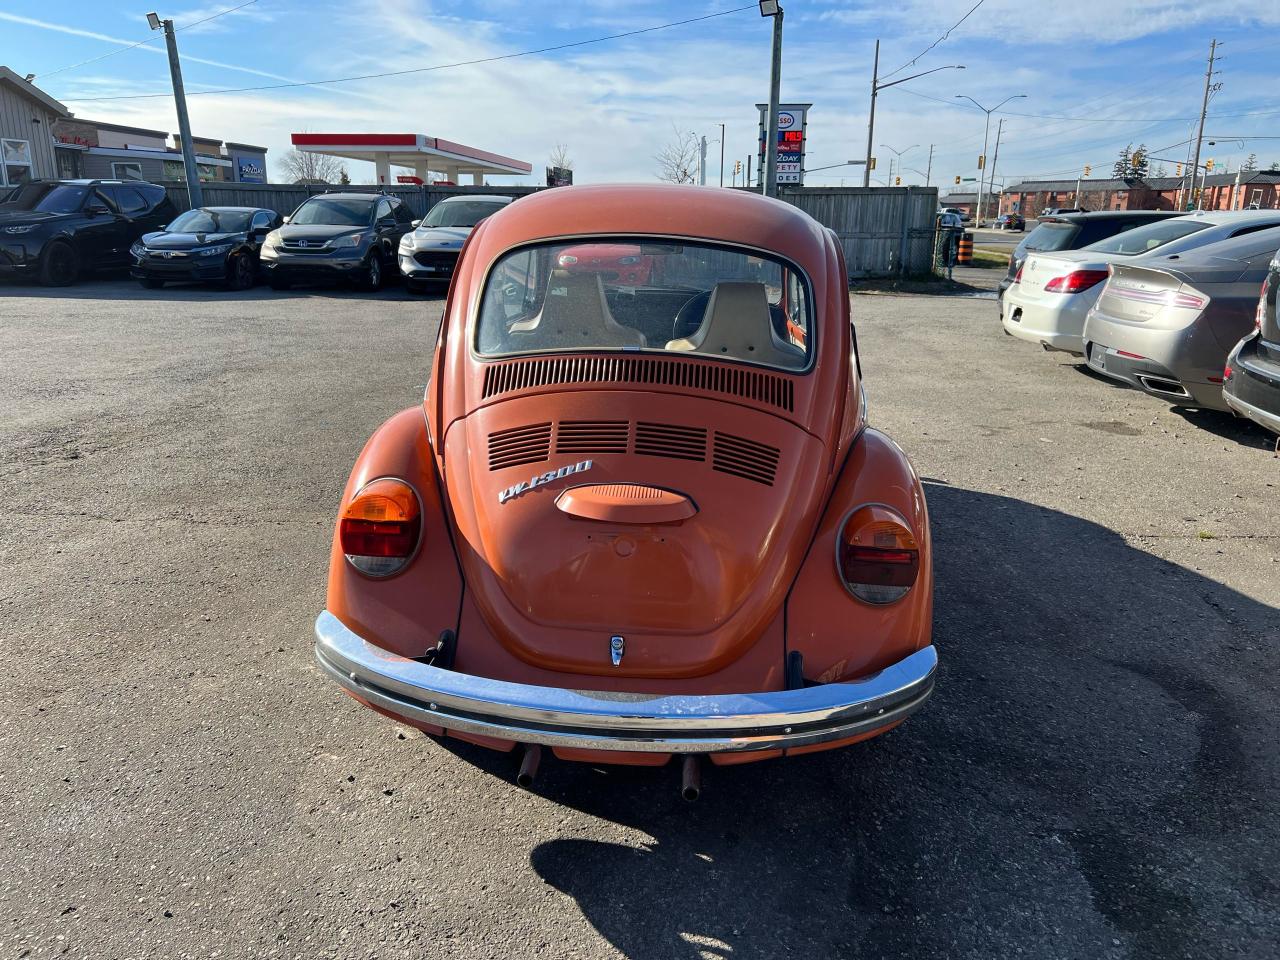 1975 Volkswagen Beetle VERY CLEAN*WELL MAINTAINED*RUNS AND DRIVES GREAT* - Photo #4